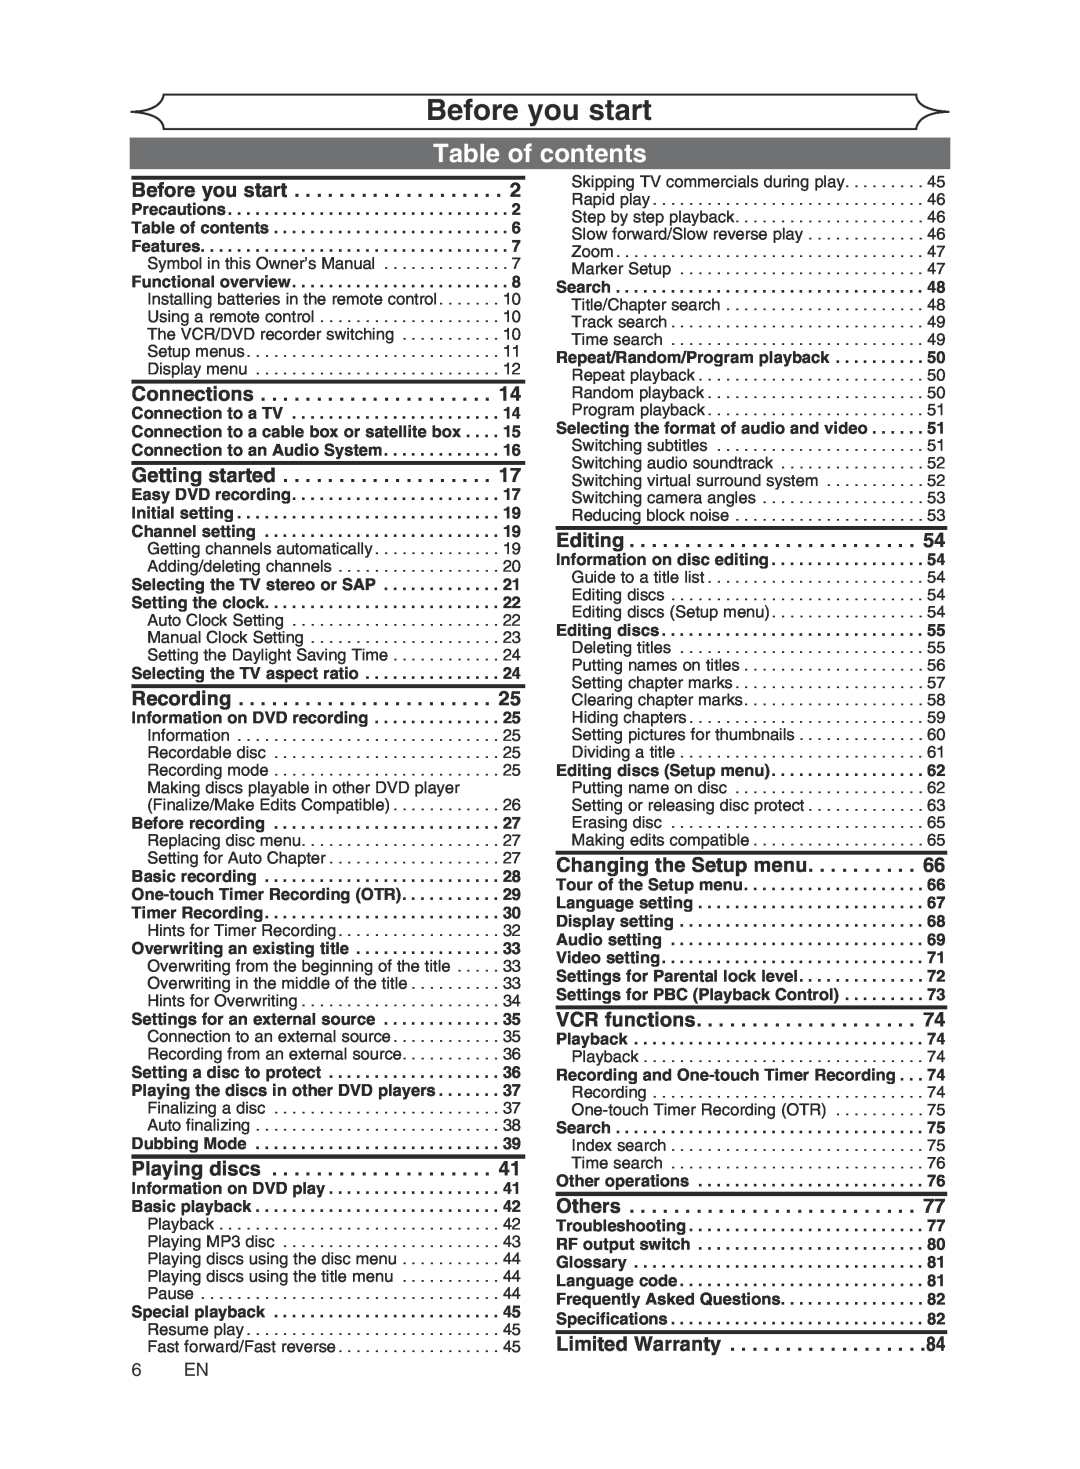 Magnavox cmwR20v6 manual Table of contents, Before you start 